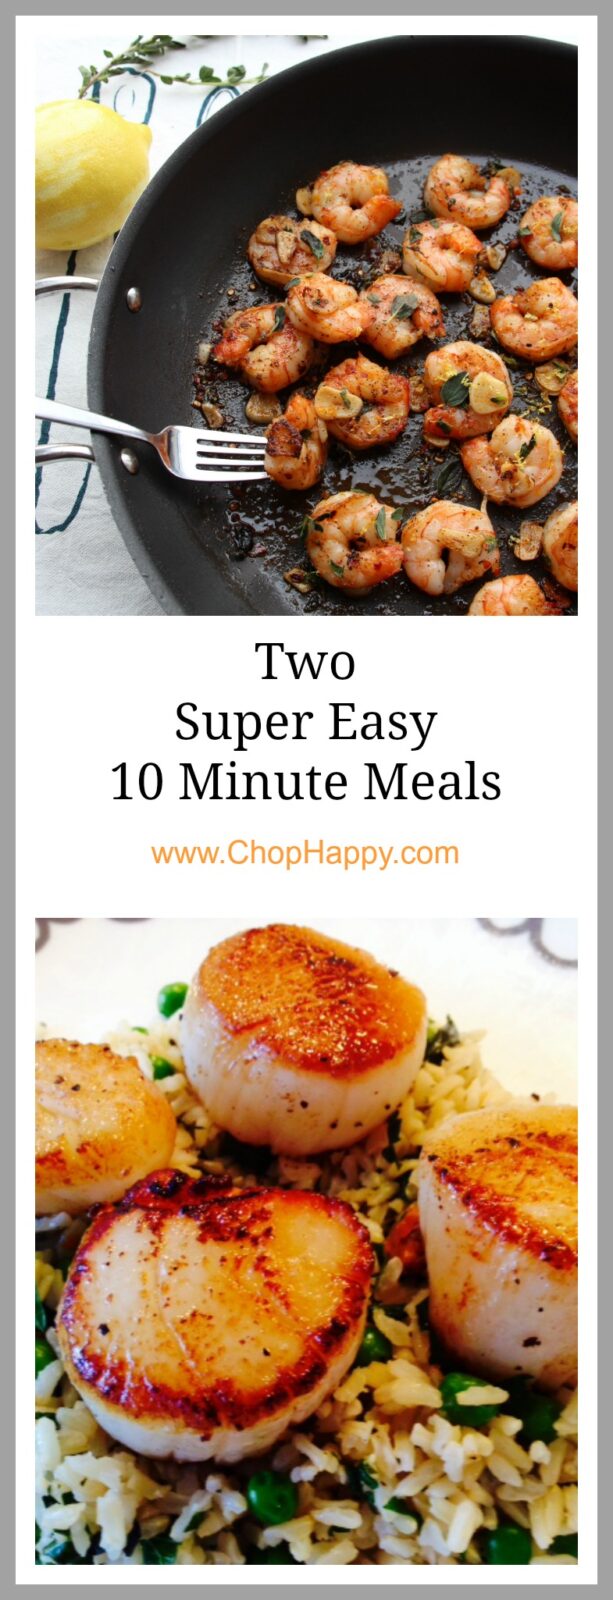 Two Super Easy 10 Minute Meals.. The ultimate busy day recipes. One pan, 10 minutes, and so full of flavor. www.ChopHappy.com